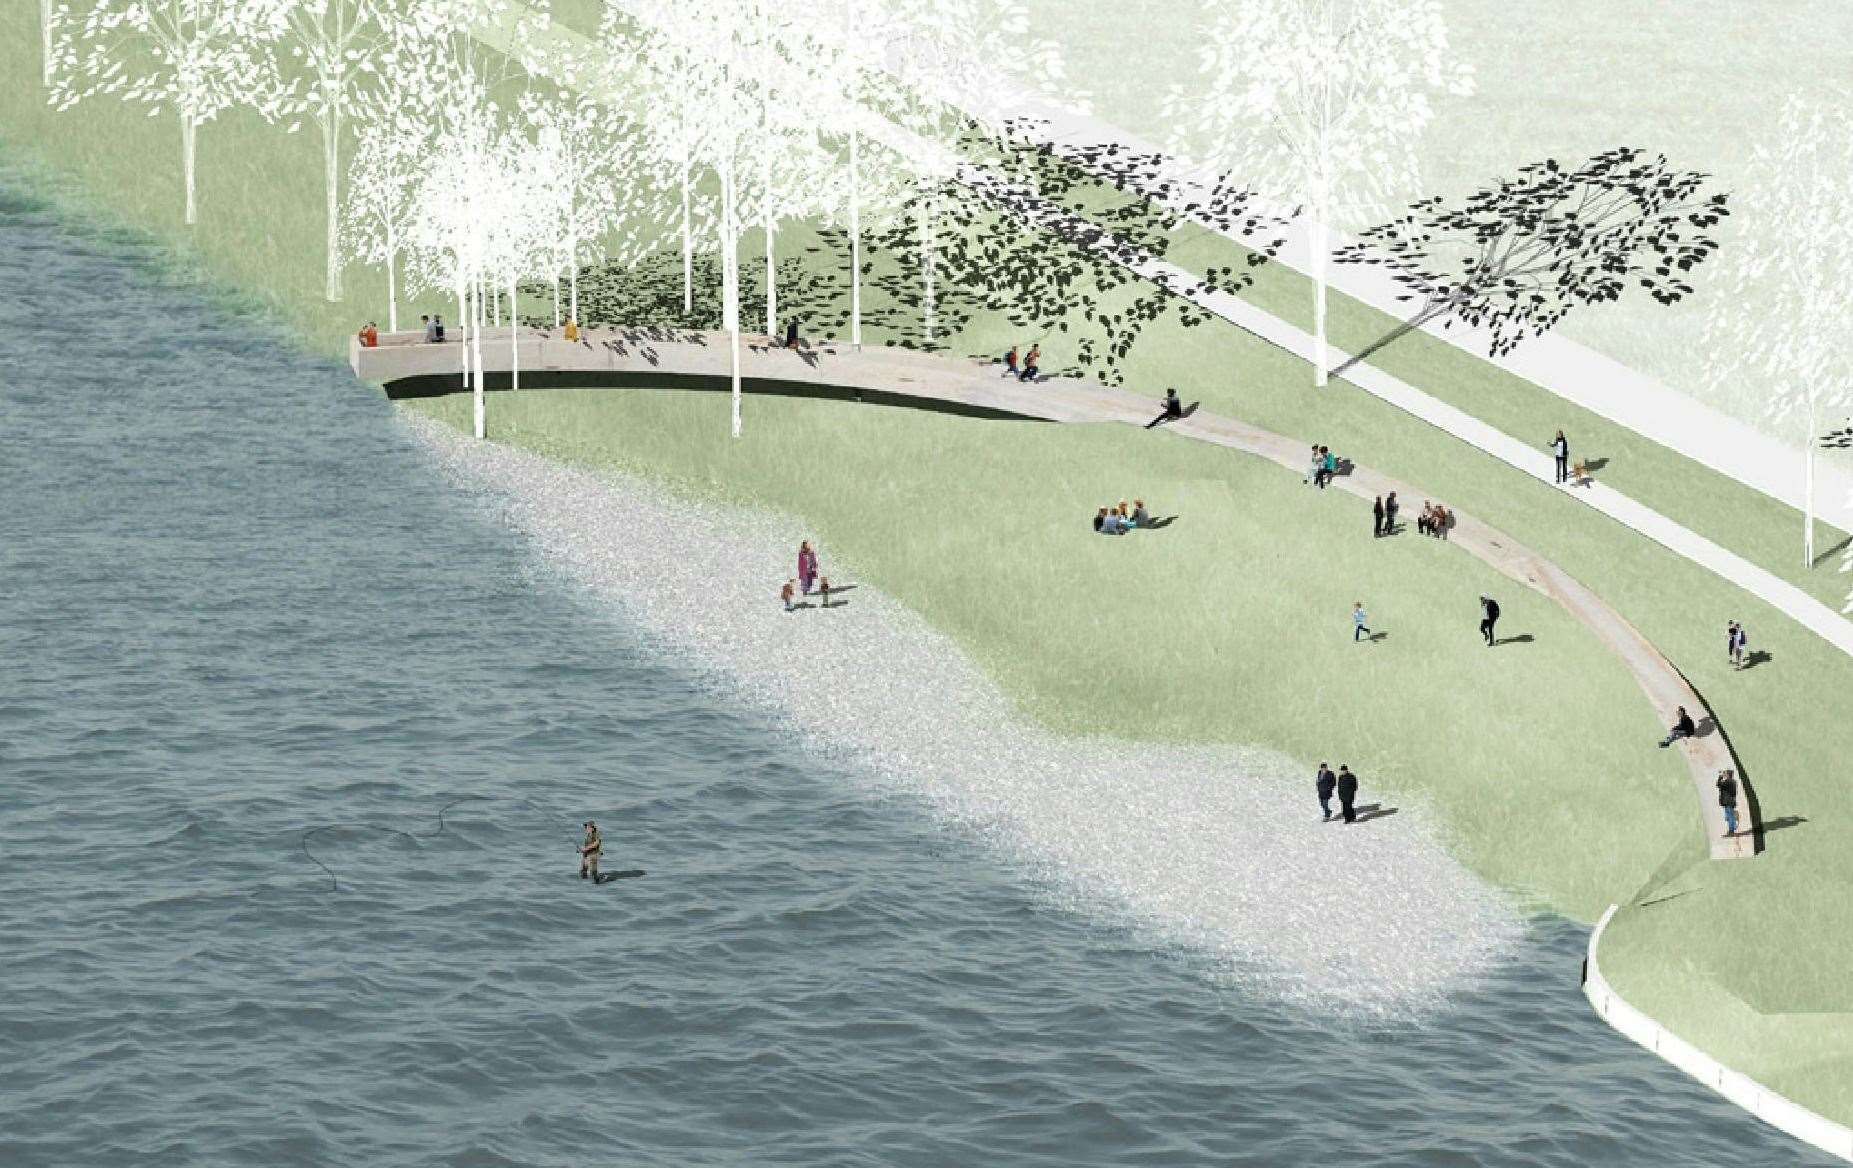 Councillors are set to meet to discuss the riverside art project next week, including the proposed My Ness creation.